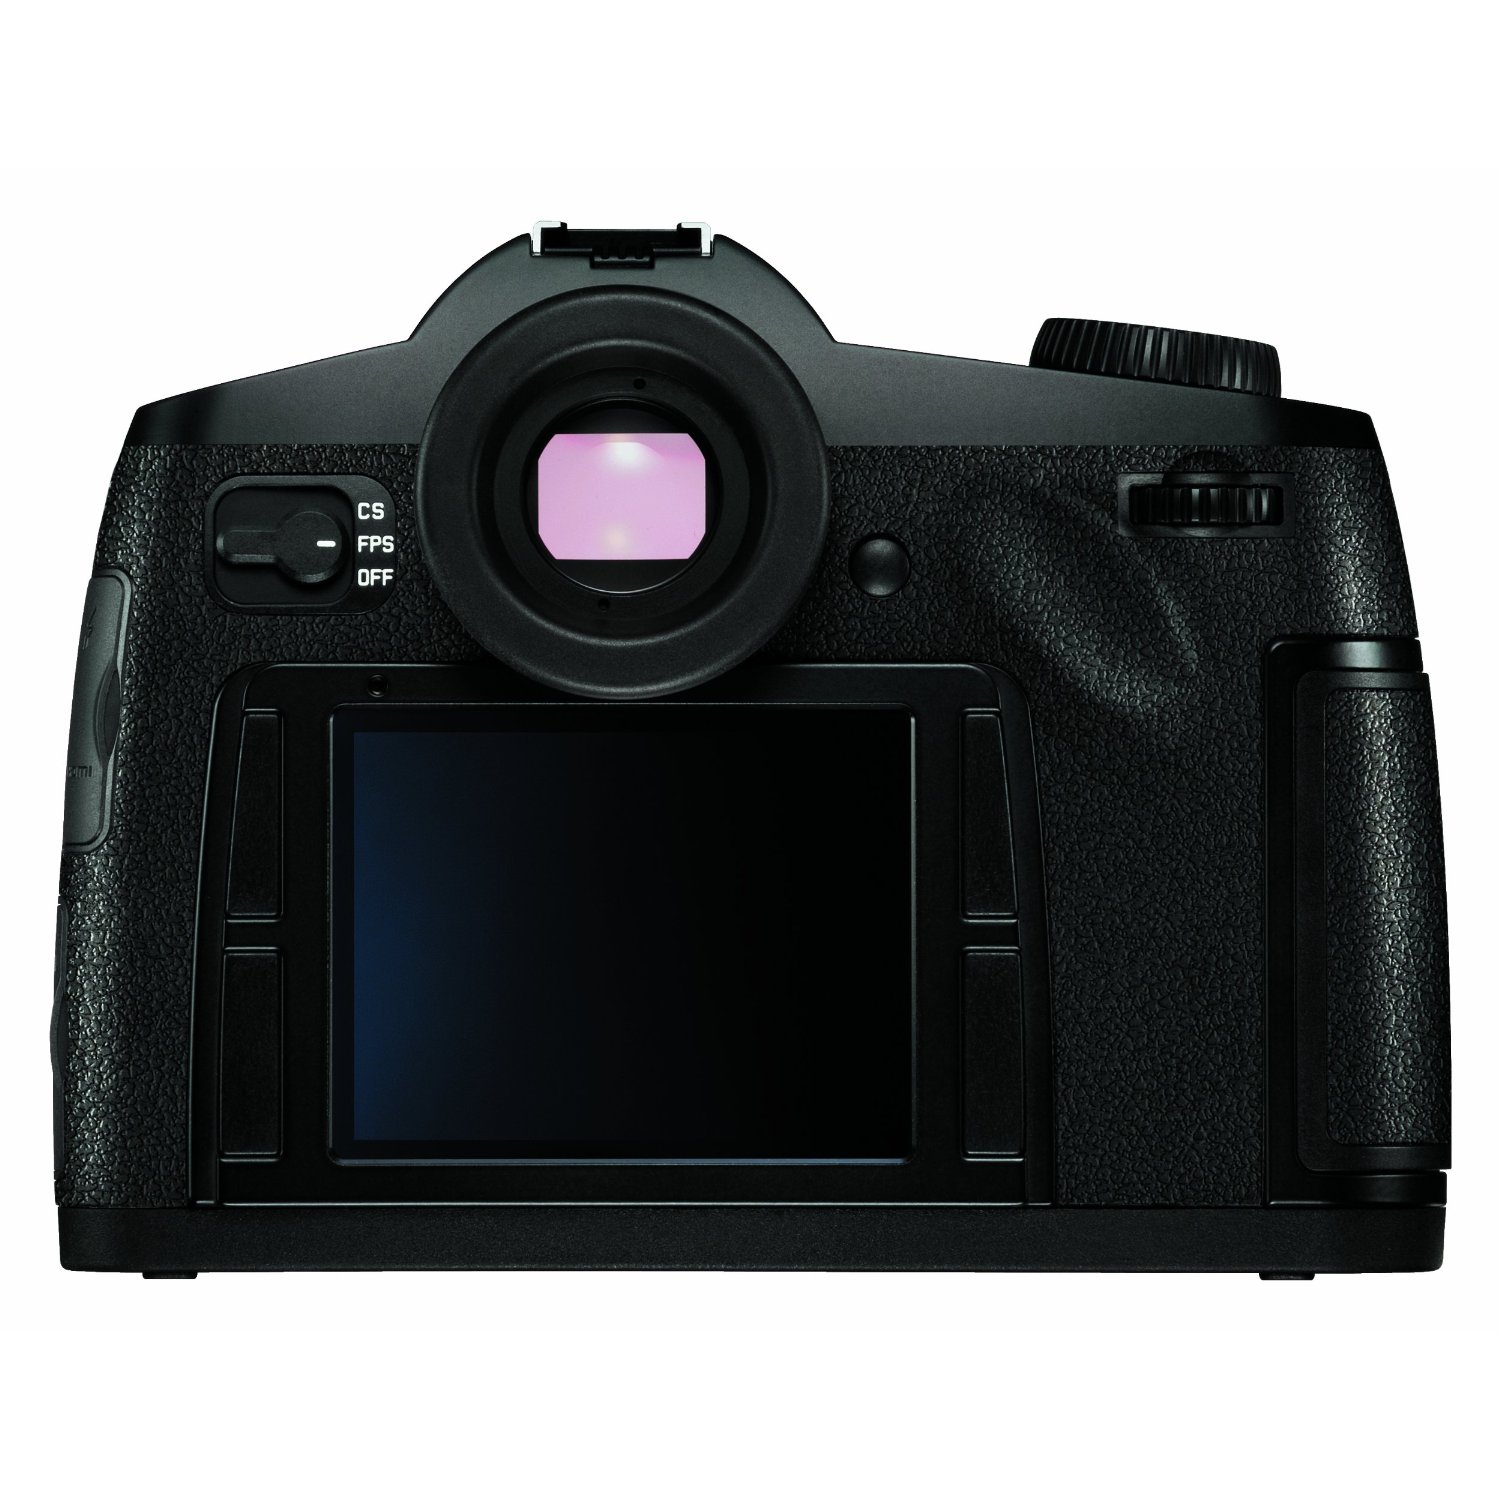 http://thetechjournal.com/wp-content/uploads/images/1109/1316325950-leica-s2-375mp-interchangeable-lens-camera-cost-28000-3.jpg